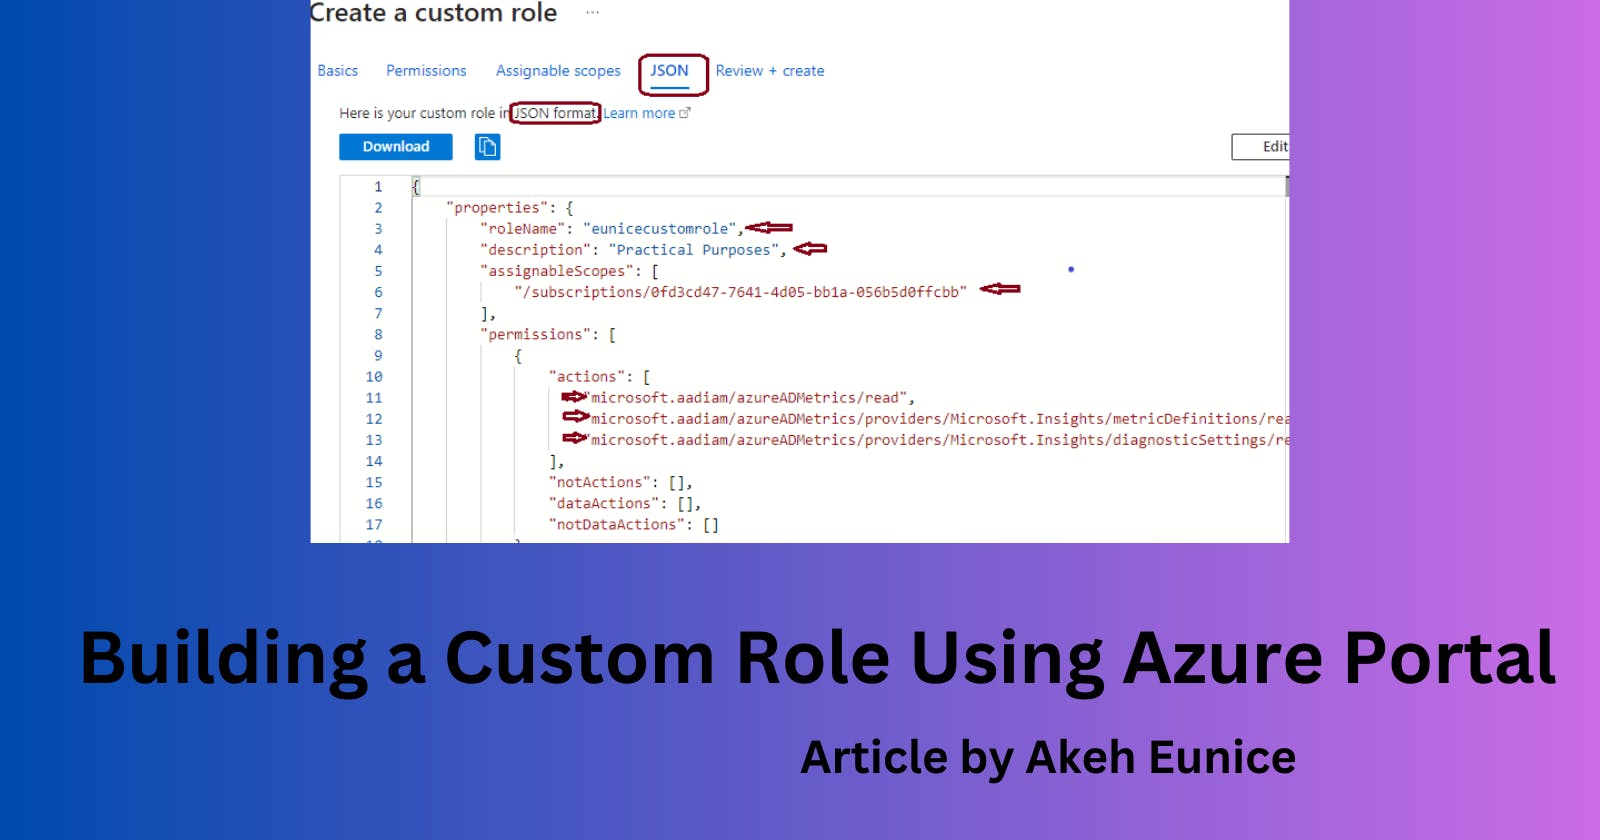 Step-by-Step Guide to Building a Custom Role Using Azure Portal